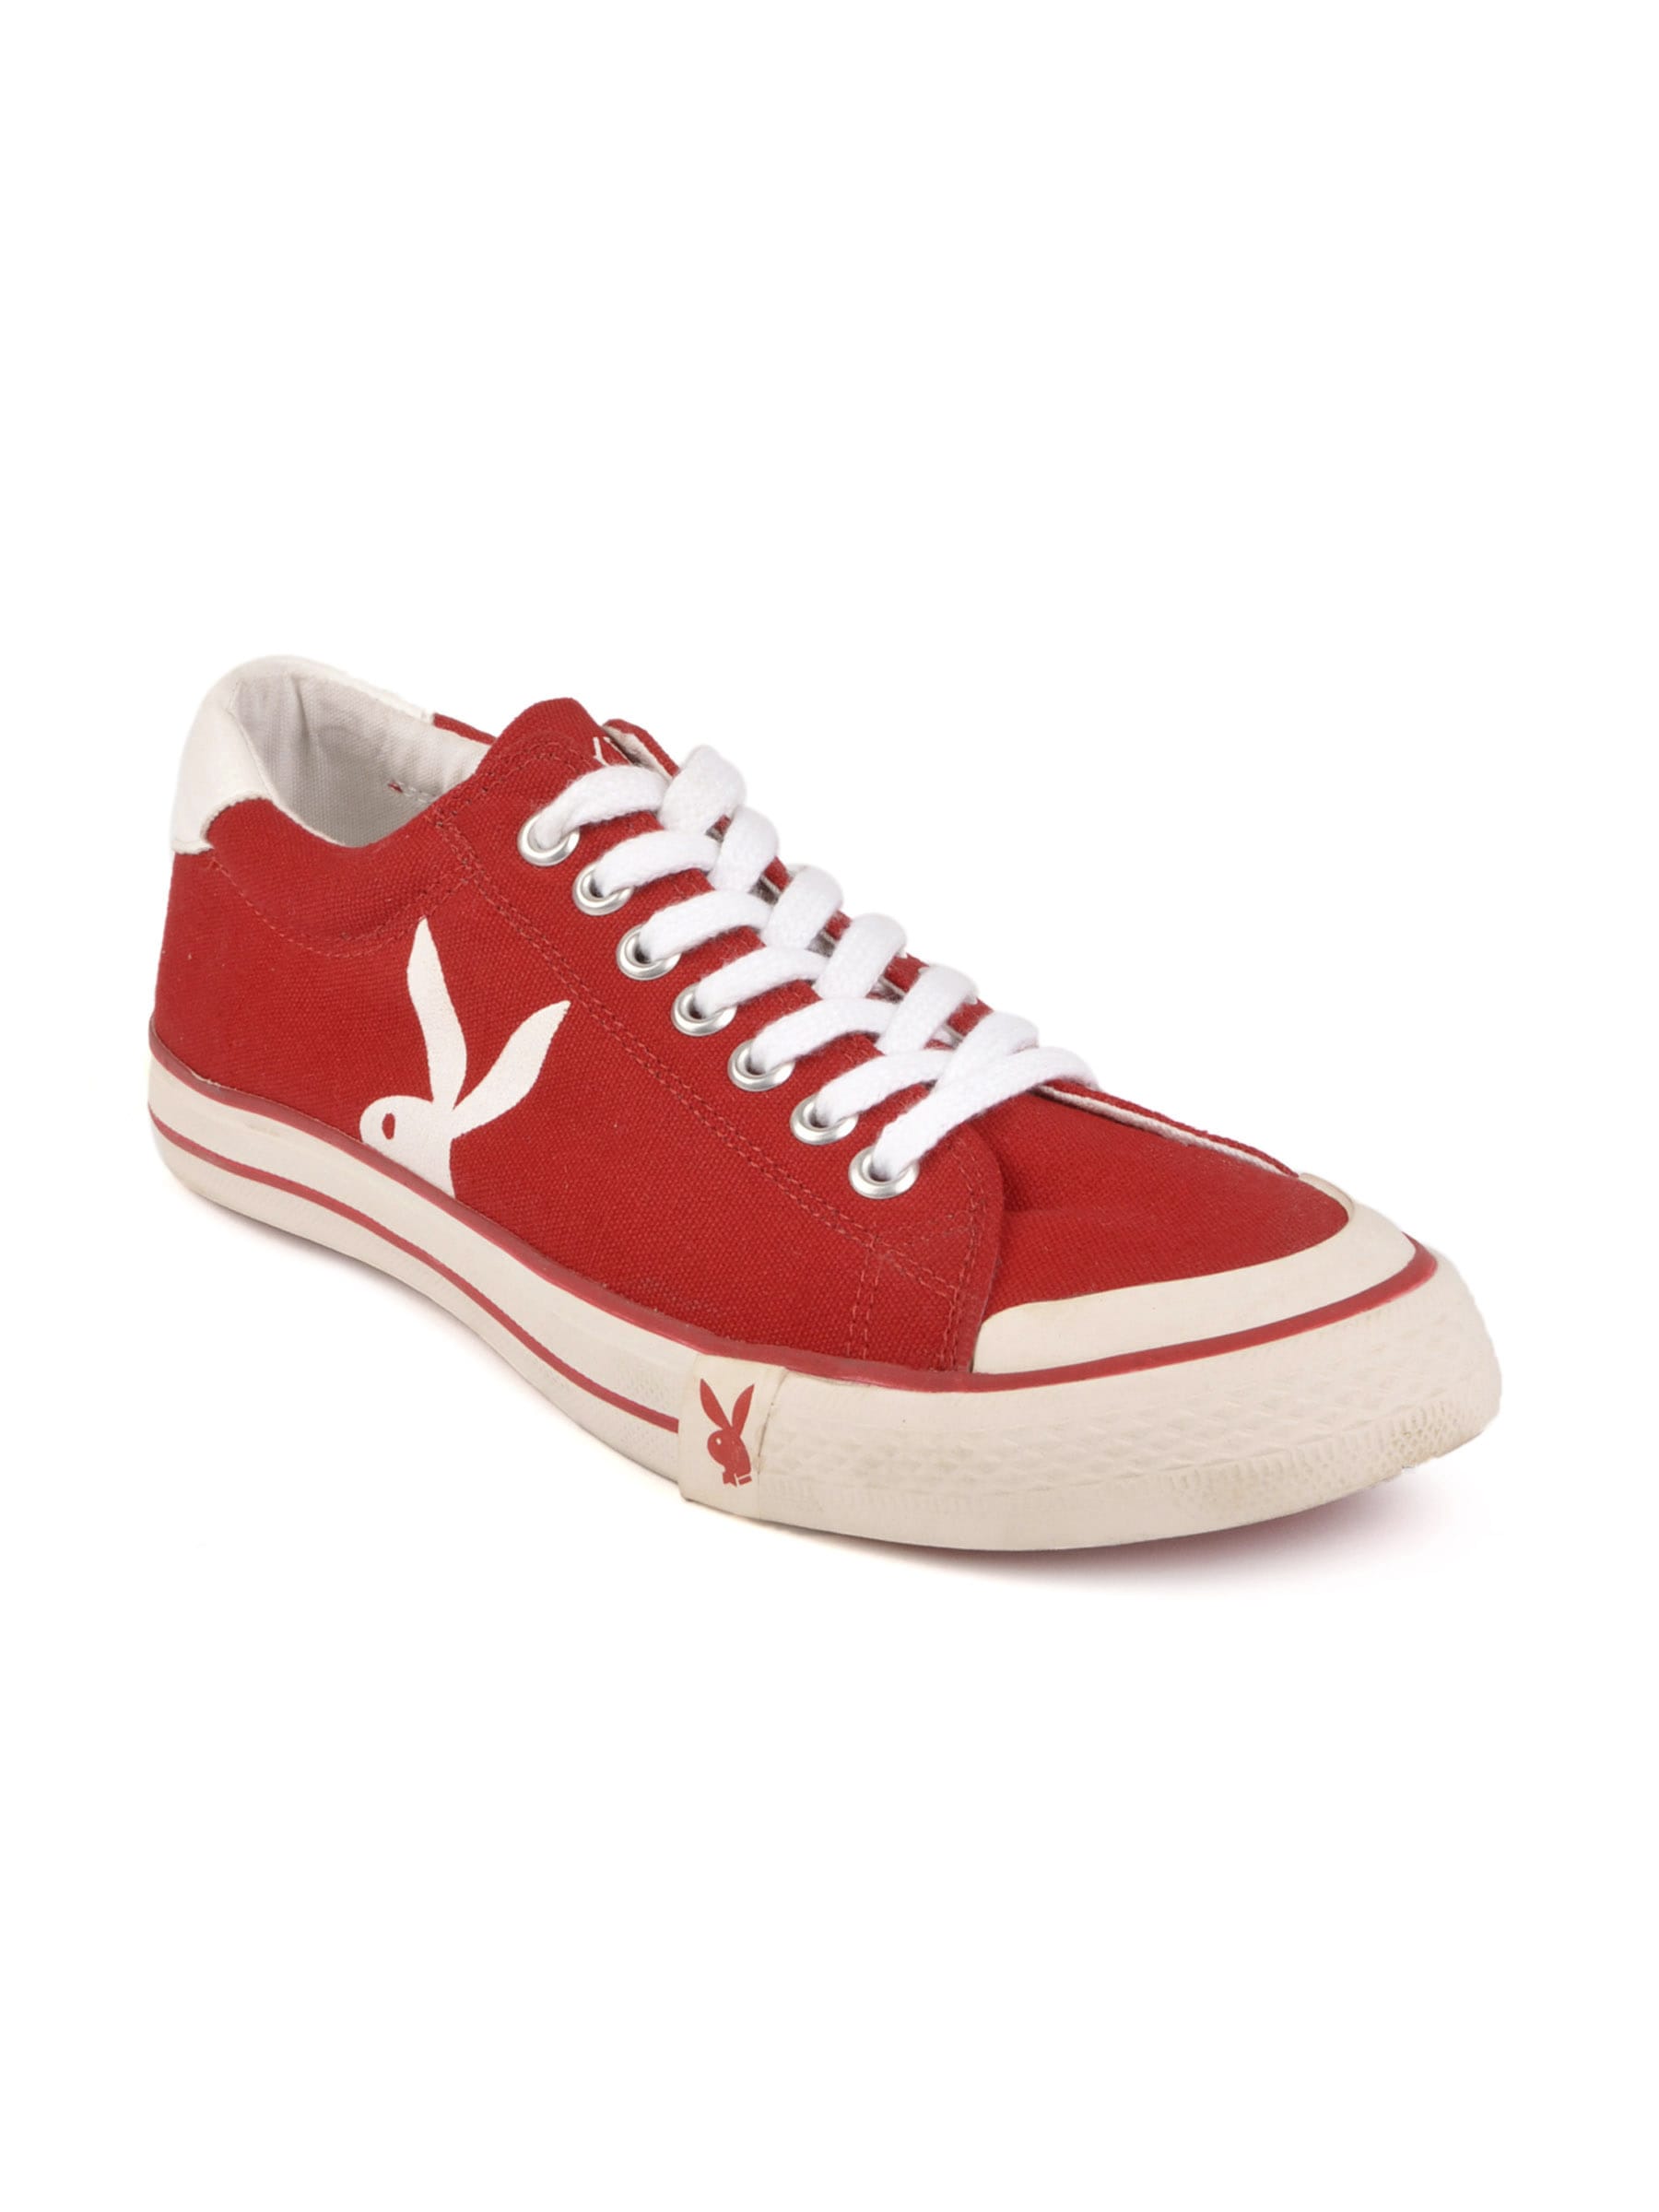 Playboy Men Casual Red Casual Shoes